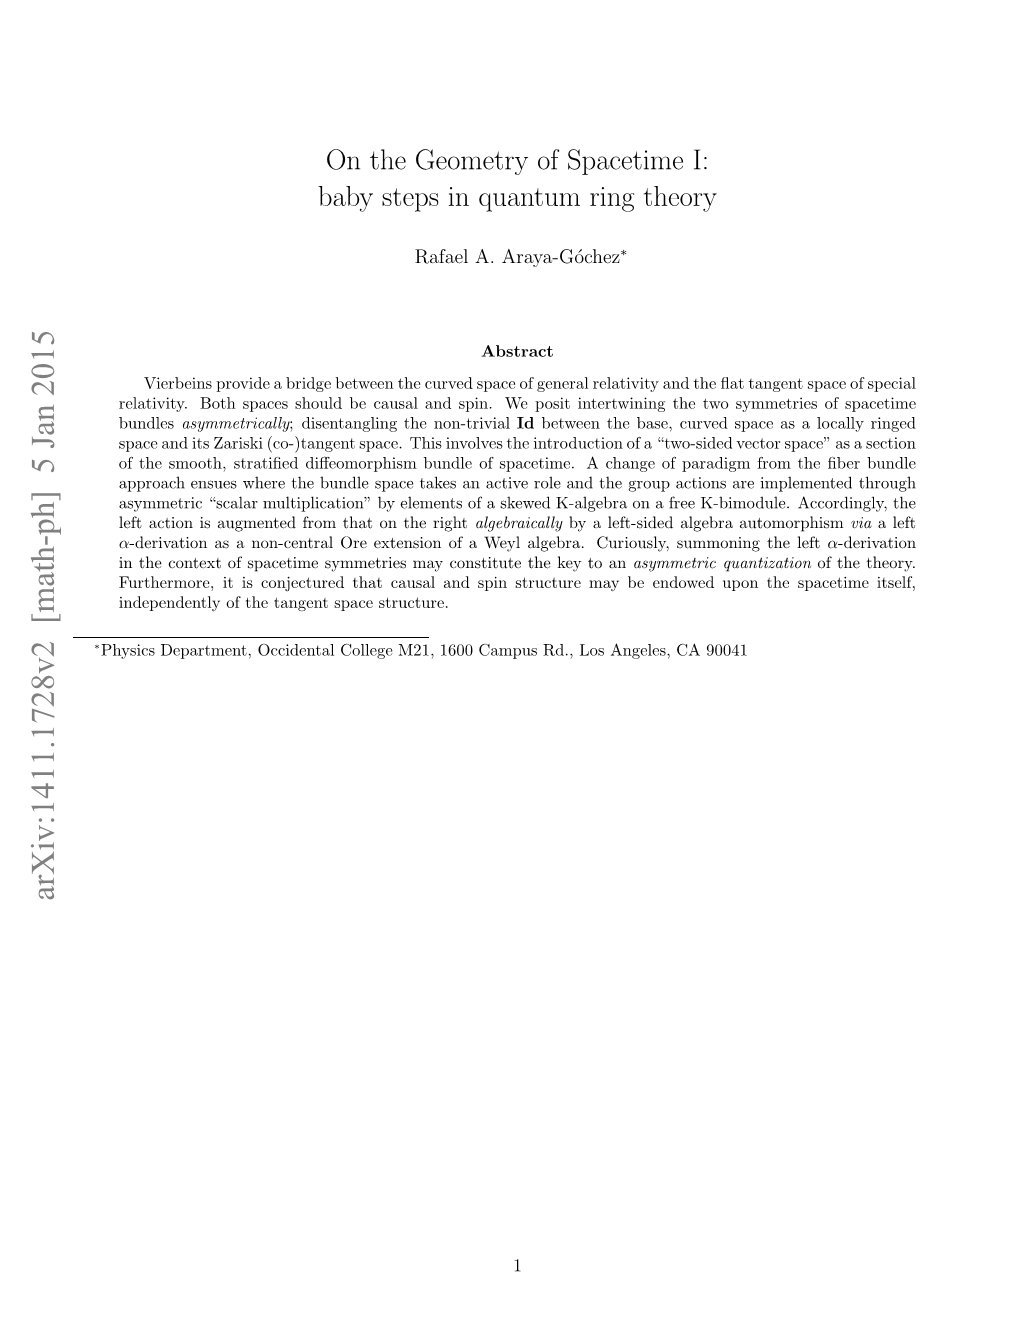 On the Geometry of Spacetime I: Baby Steps in Quantum Ring Theory